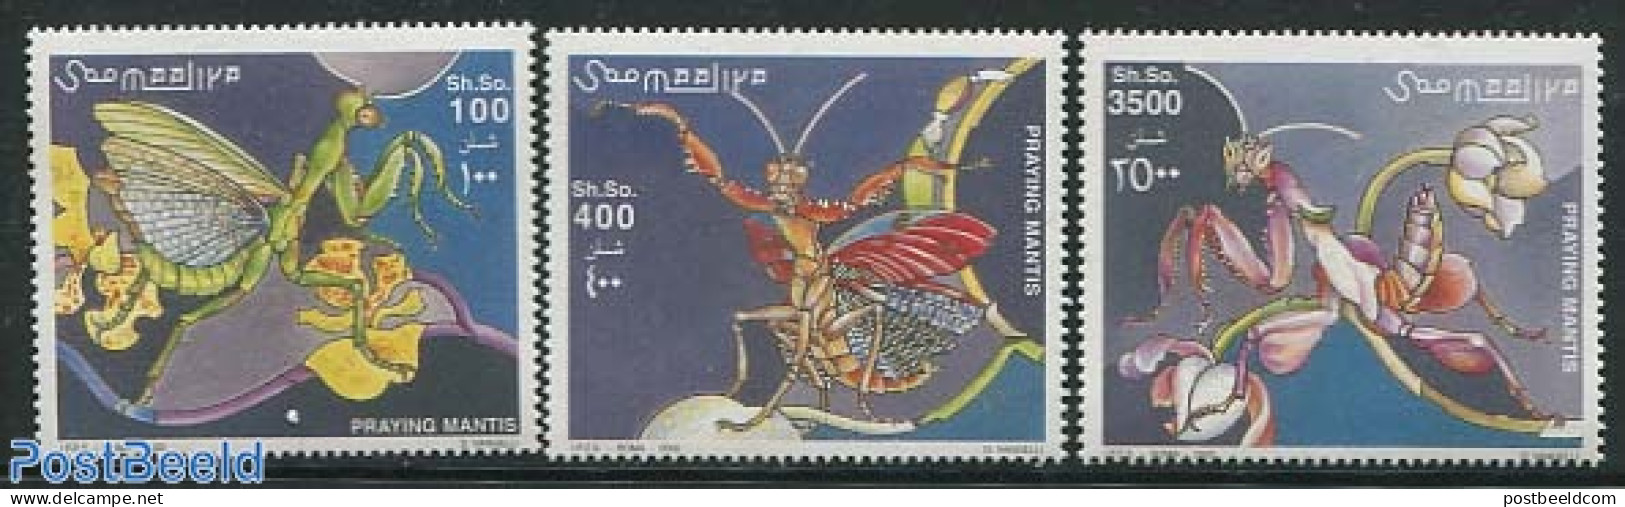 Somalia 2002 Insects 3v, Mint NH, Nature - Insects - Somalia (1960-...)